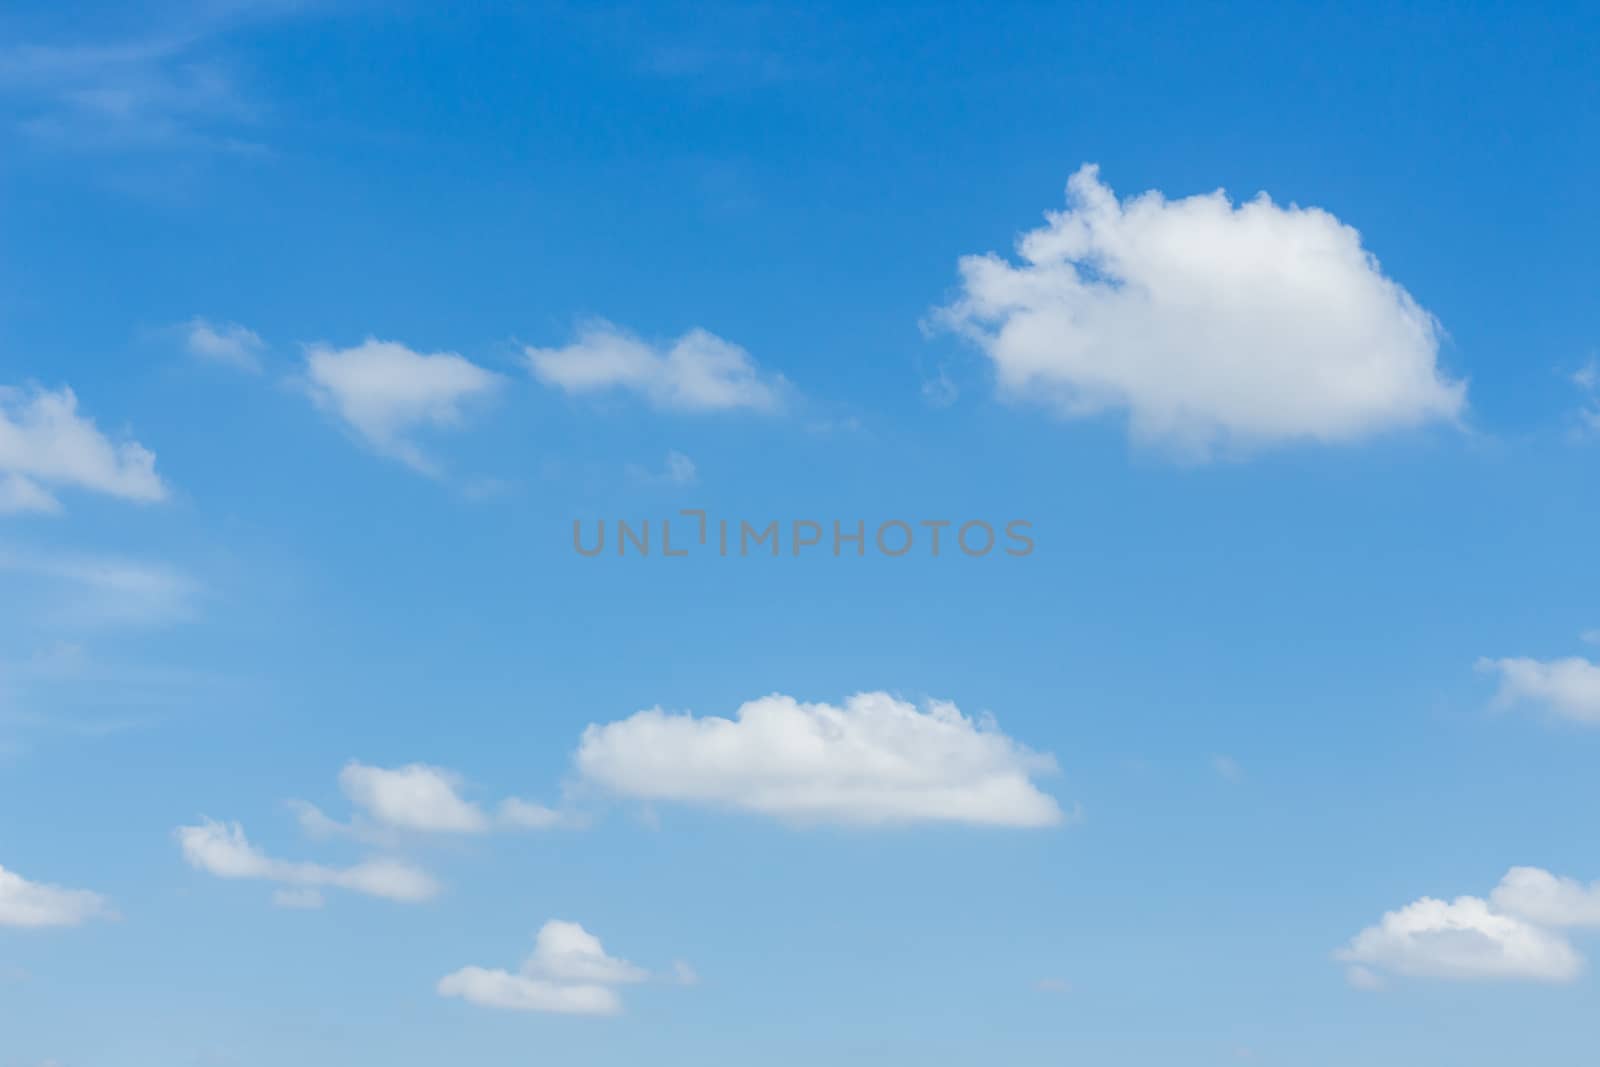 White clouds in the beautiful blue sky by blackzheep